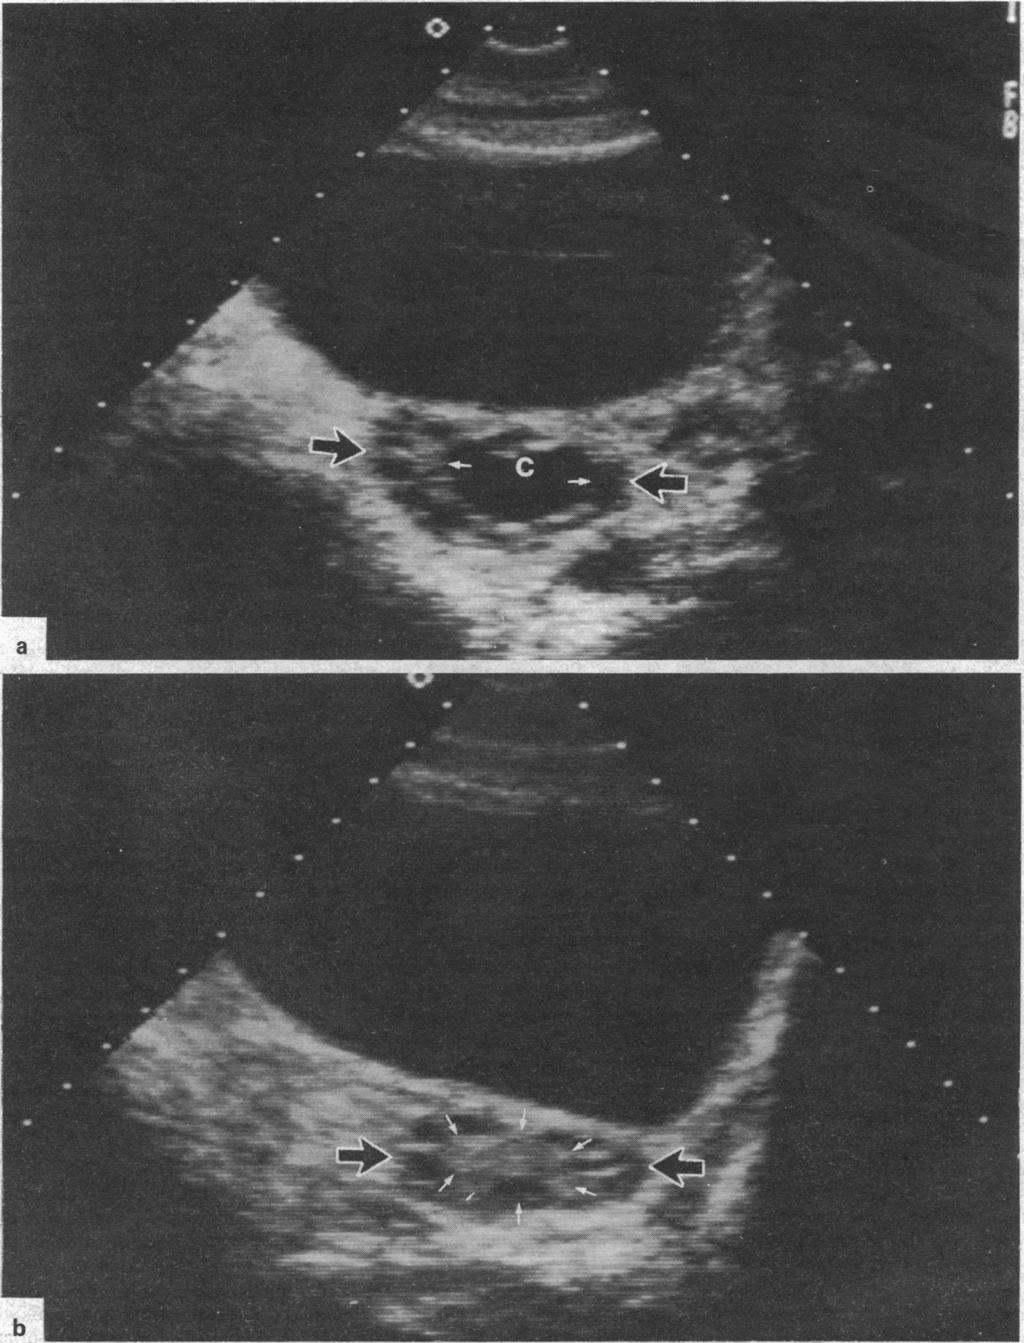 BRITISH MEDICAL JOURNAL VOLUME 293 9 AUGUST 1986 357 b FIG 2-Ultrasound appearance of ovary in women with polycystic ovaries but ovulatory cycles.